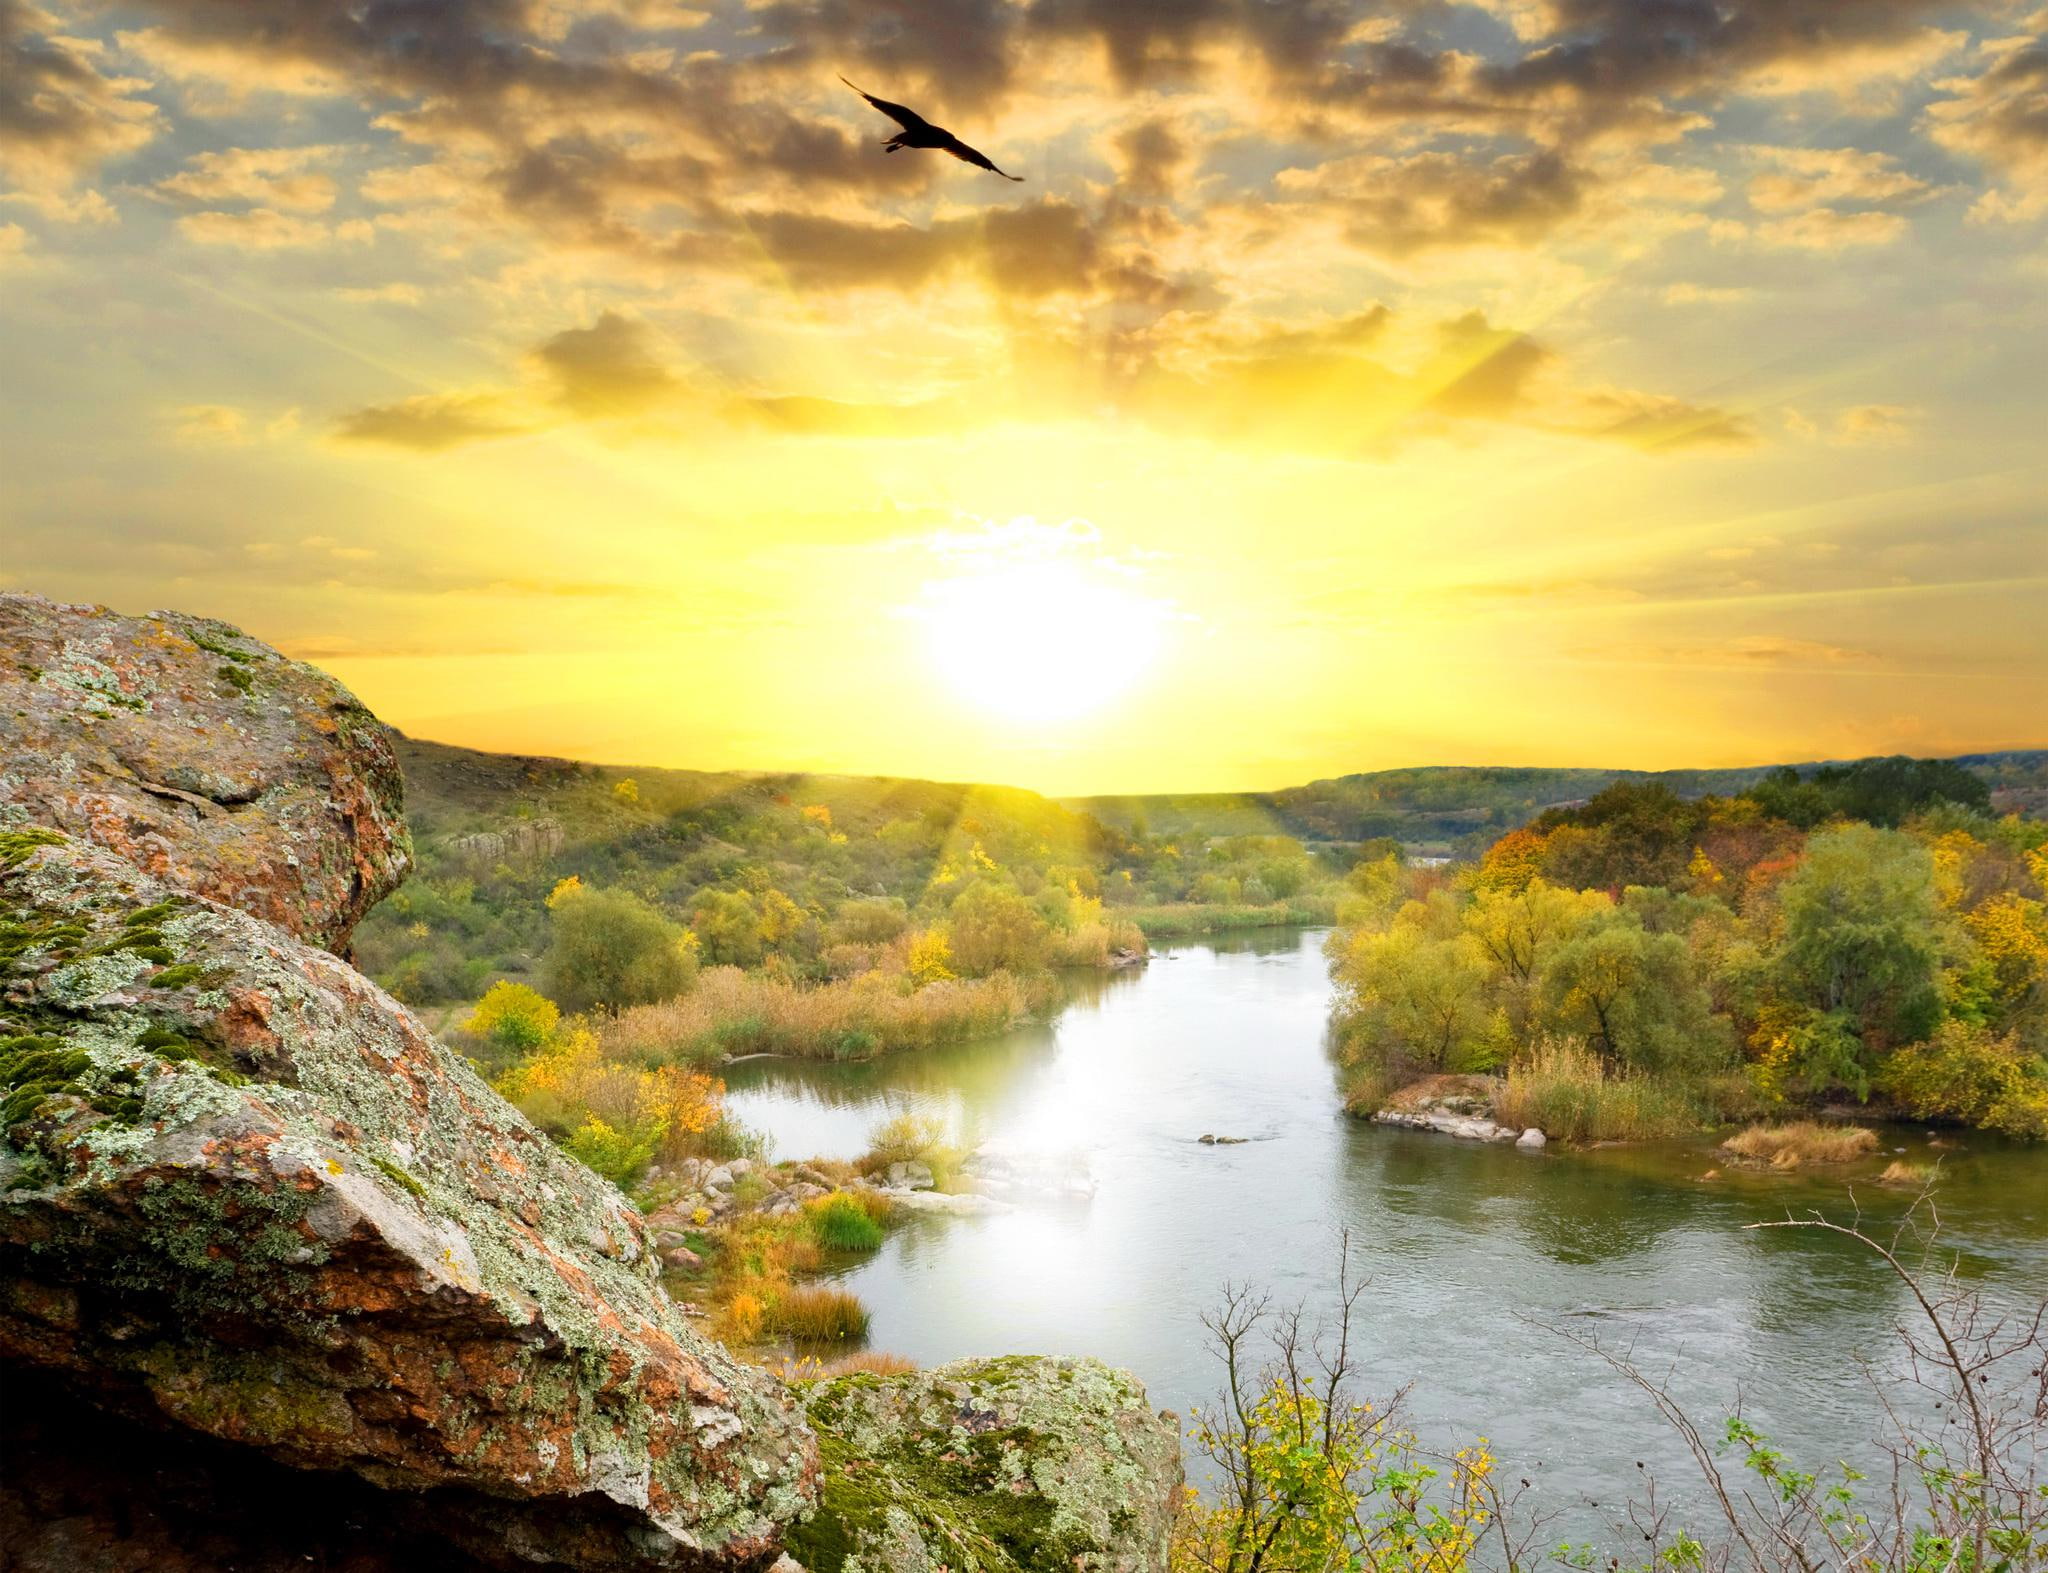 Sunrises Sunsets Scenery Rivers Nature Autumn For Mobile, brown and grey rock and green trees